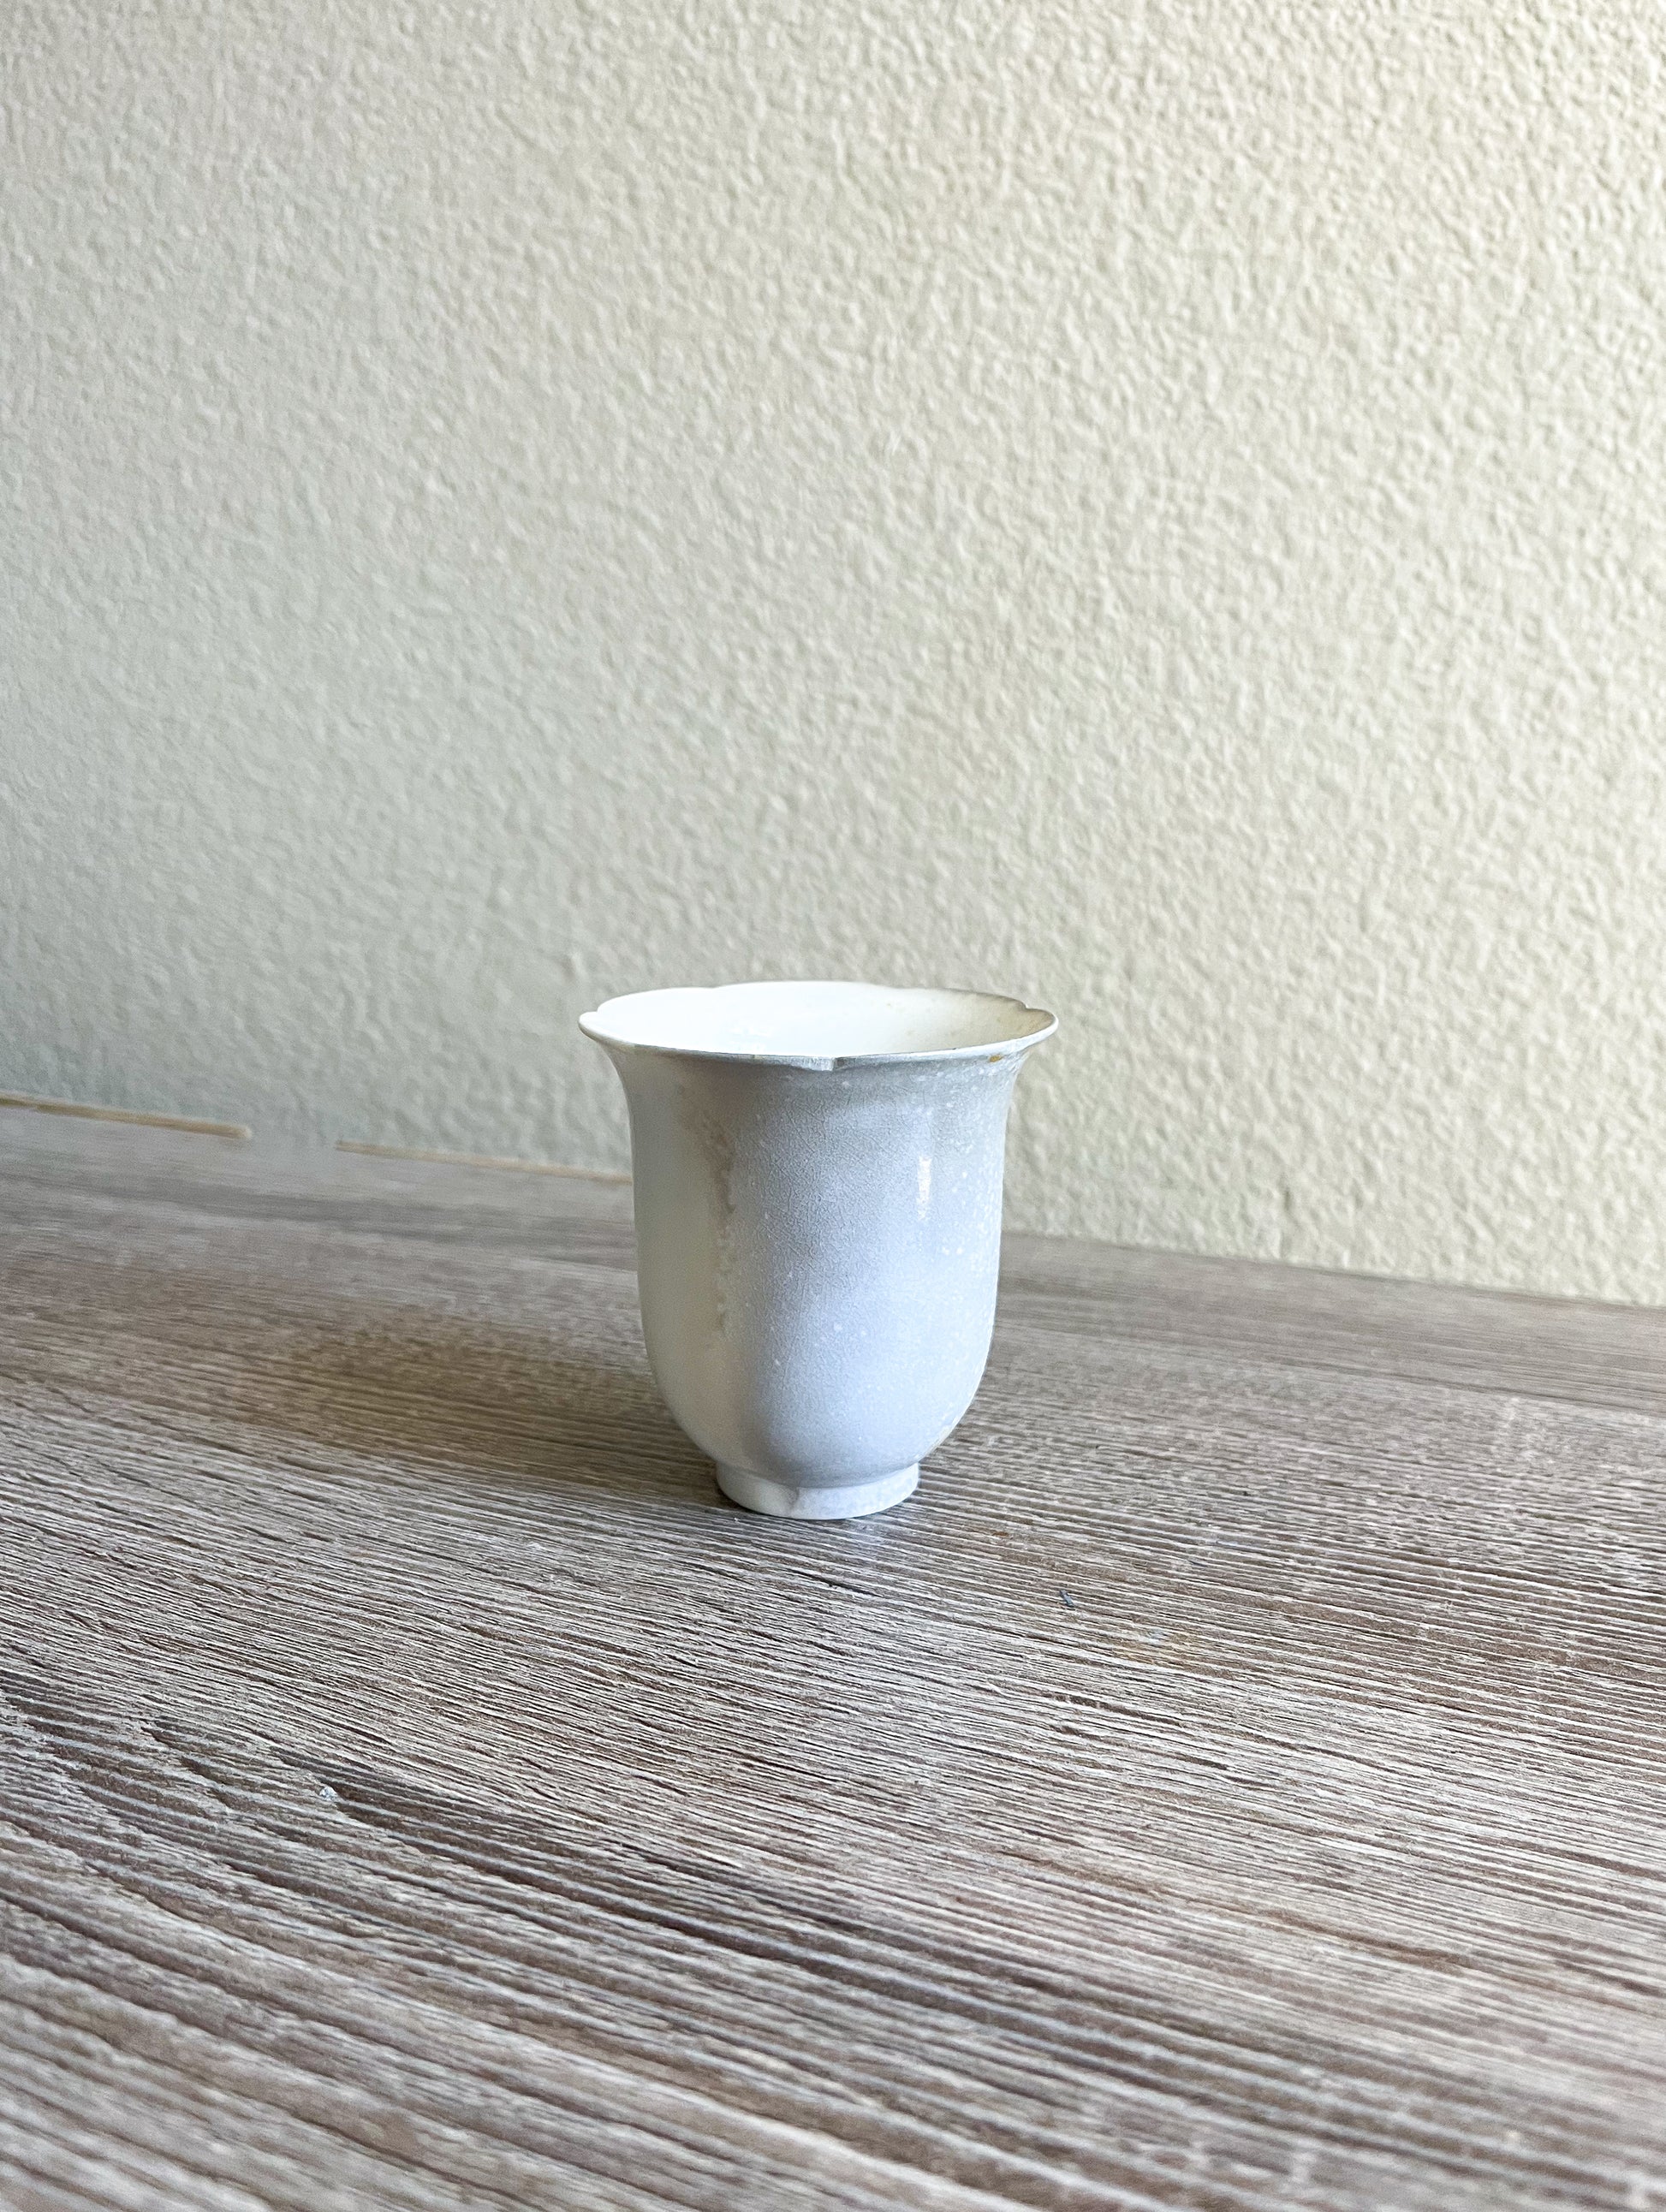 Handcrafted Woodfired Ceramic Teacup (natural ash glaze)